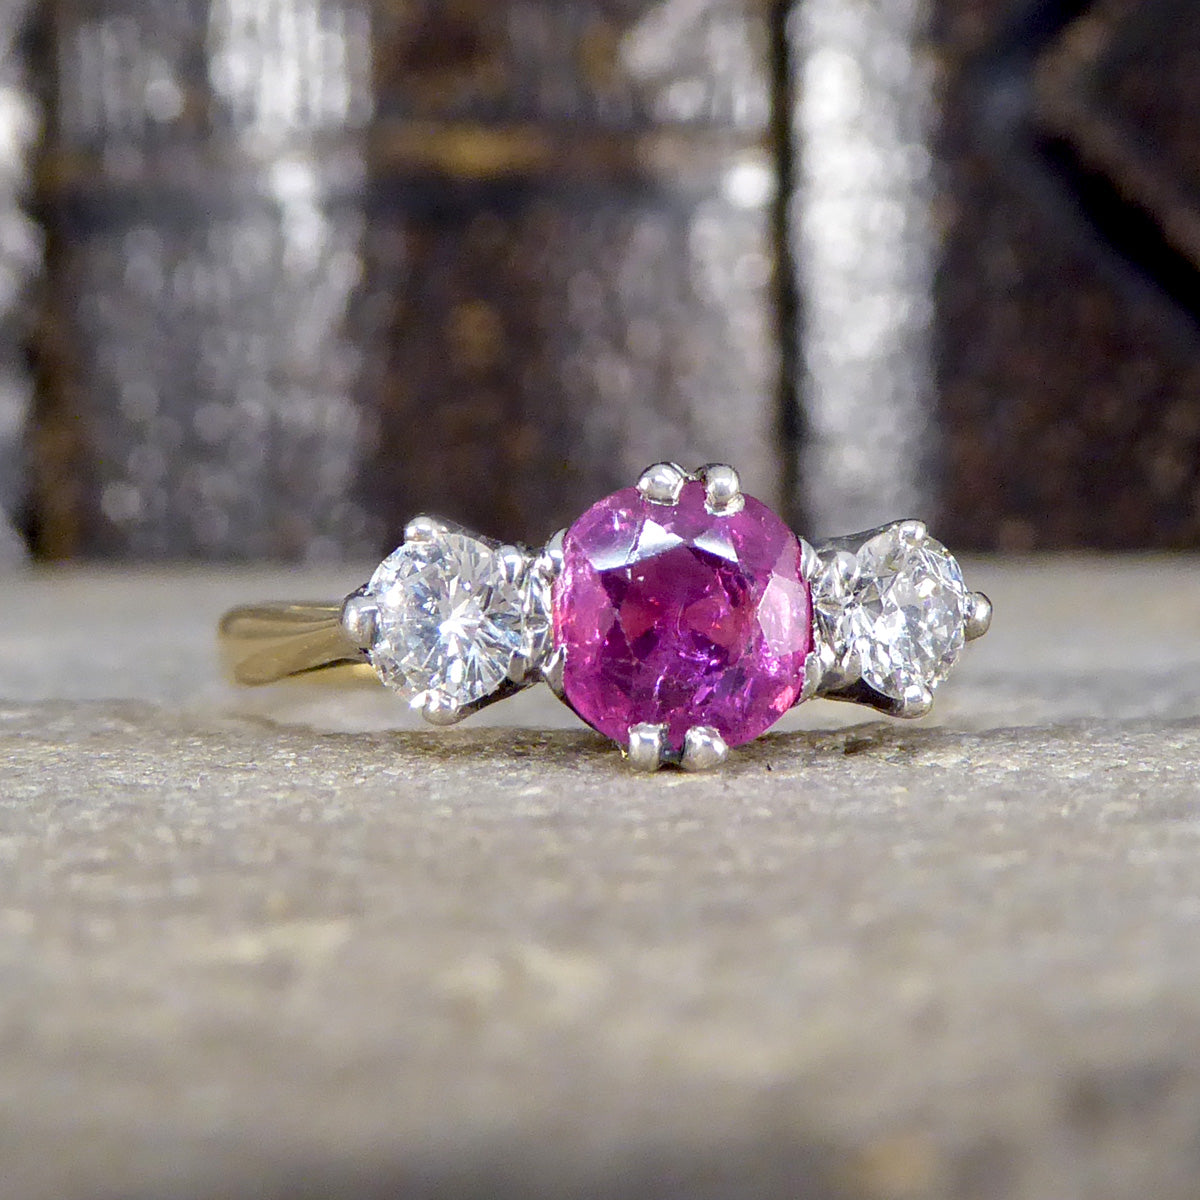 Early 20th Century Ruby and Diamond Three Stone Ring in 18ct Yellow Gold and Platinum